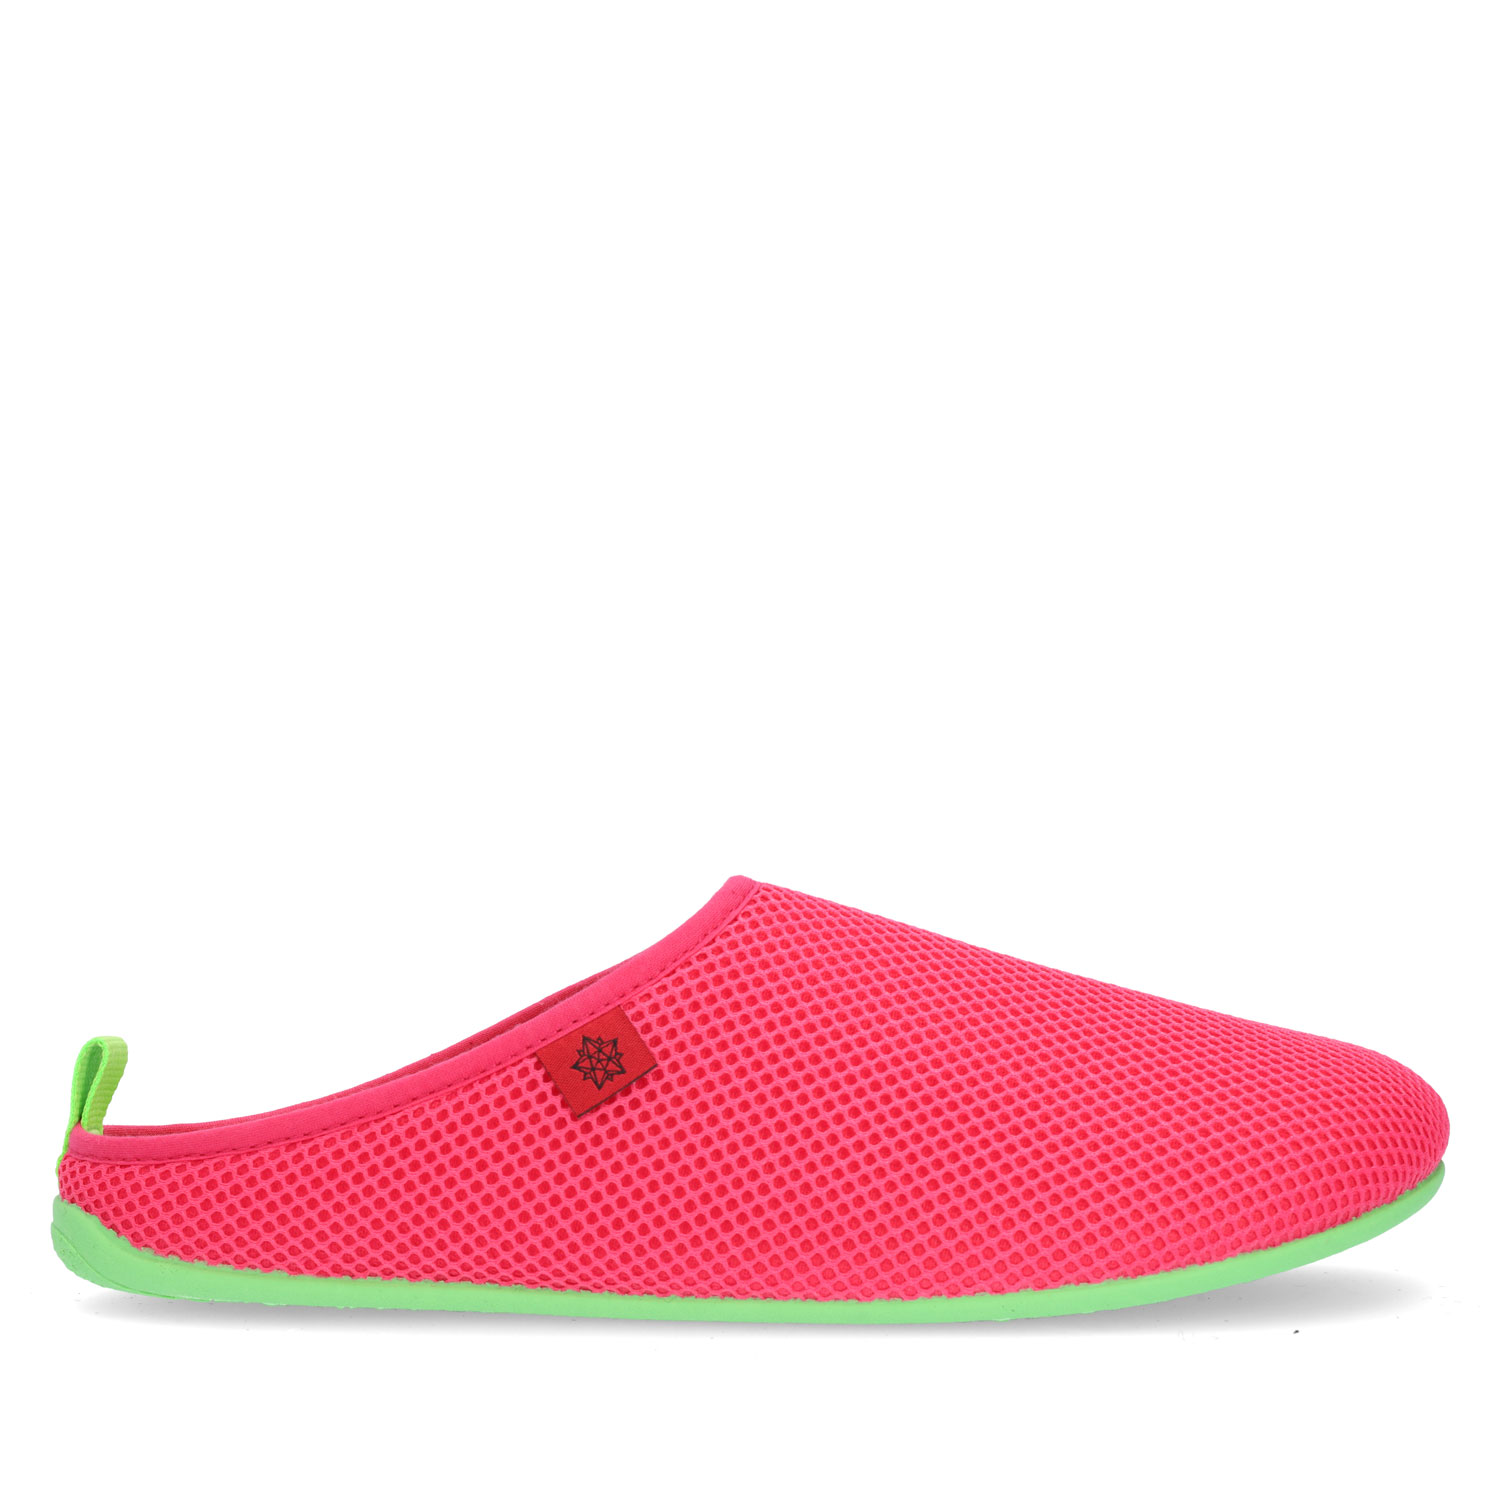 Spring/ Summer Unisex Slippers in Fuchsia mesh with Green outsole 